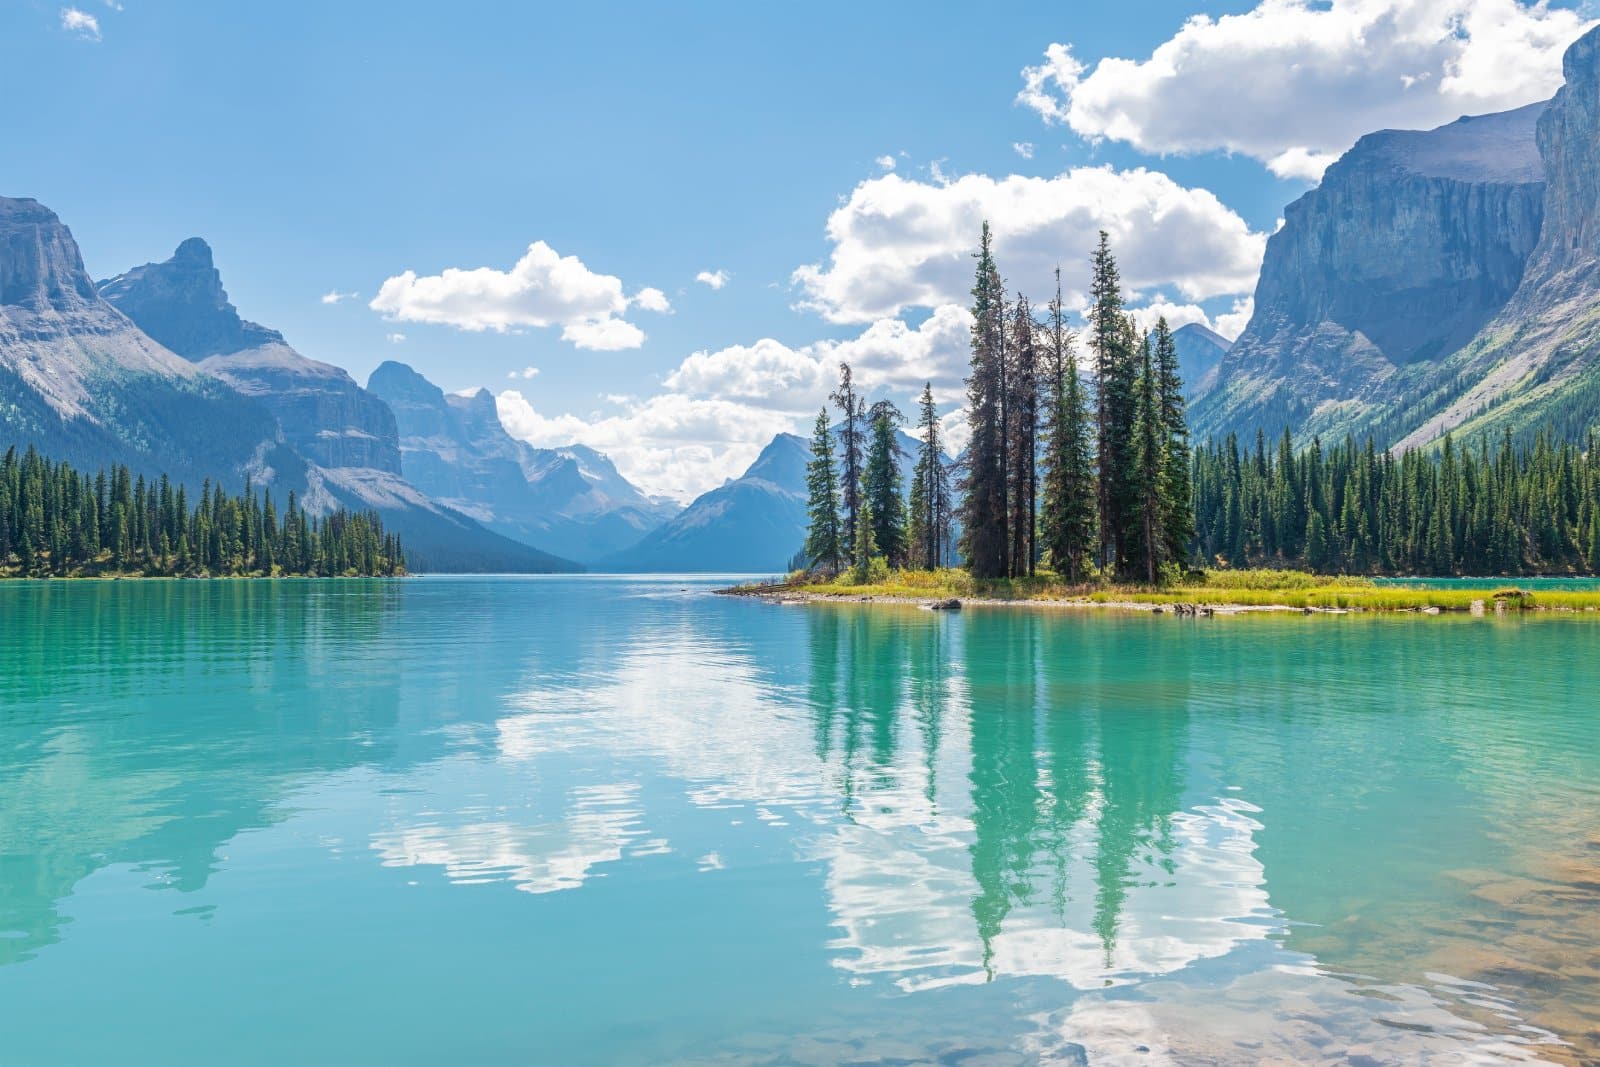 <p class="wp-caption-text">Image Credit: Shutterstock / SL-Photography</p>  <p><span>Jasper National Park, the largest national park in the Canadian Rockies, offers a more secluded and unspoiled wilderness experience than its southern neighbor, Banff. The park is home to the magnificent Columbia Icefield, the Athabasca Glacier, and the stunning Maligne Lake. Jasper’s Dark Sky Preserve, the second-largest in the world, provides unparalleled stargazing opportunities.</span></p>